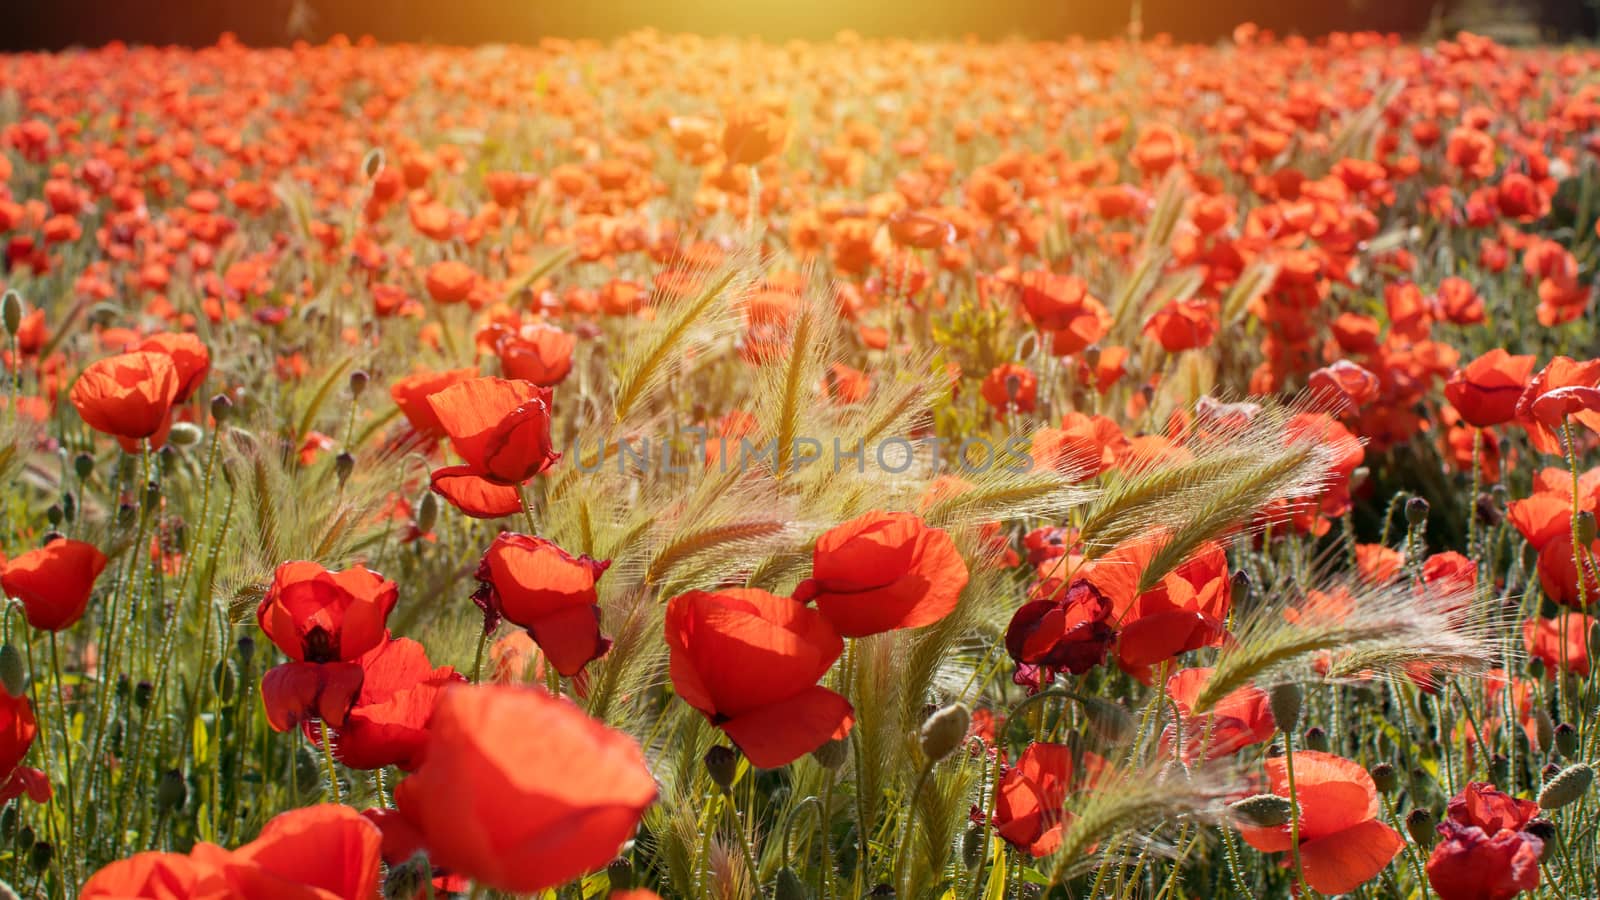 Sunset over field with Red poppies.